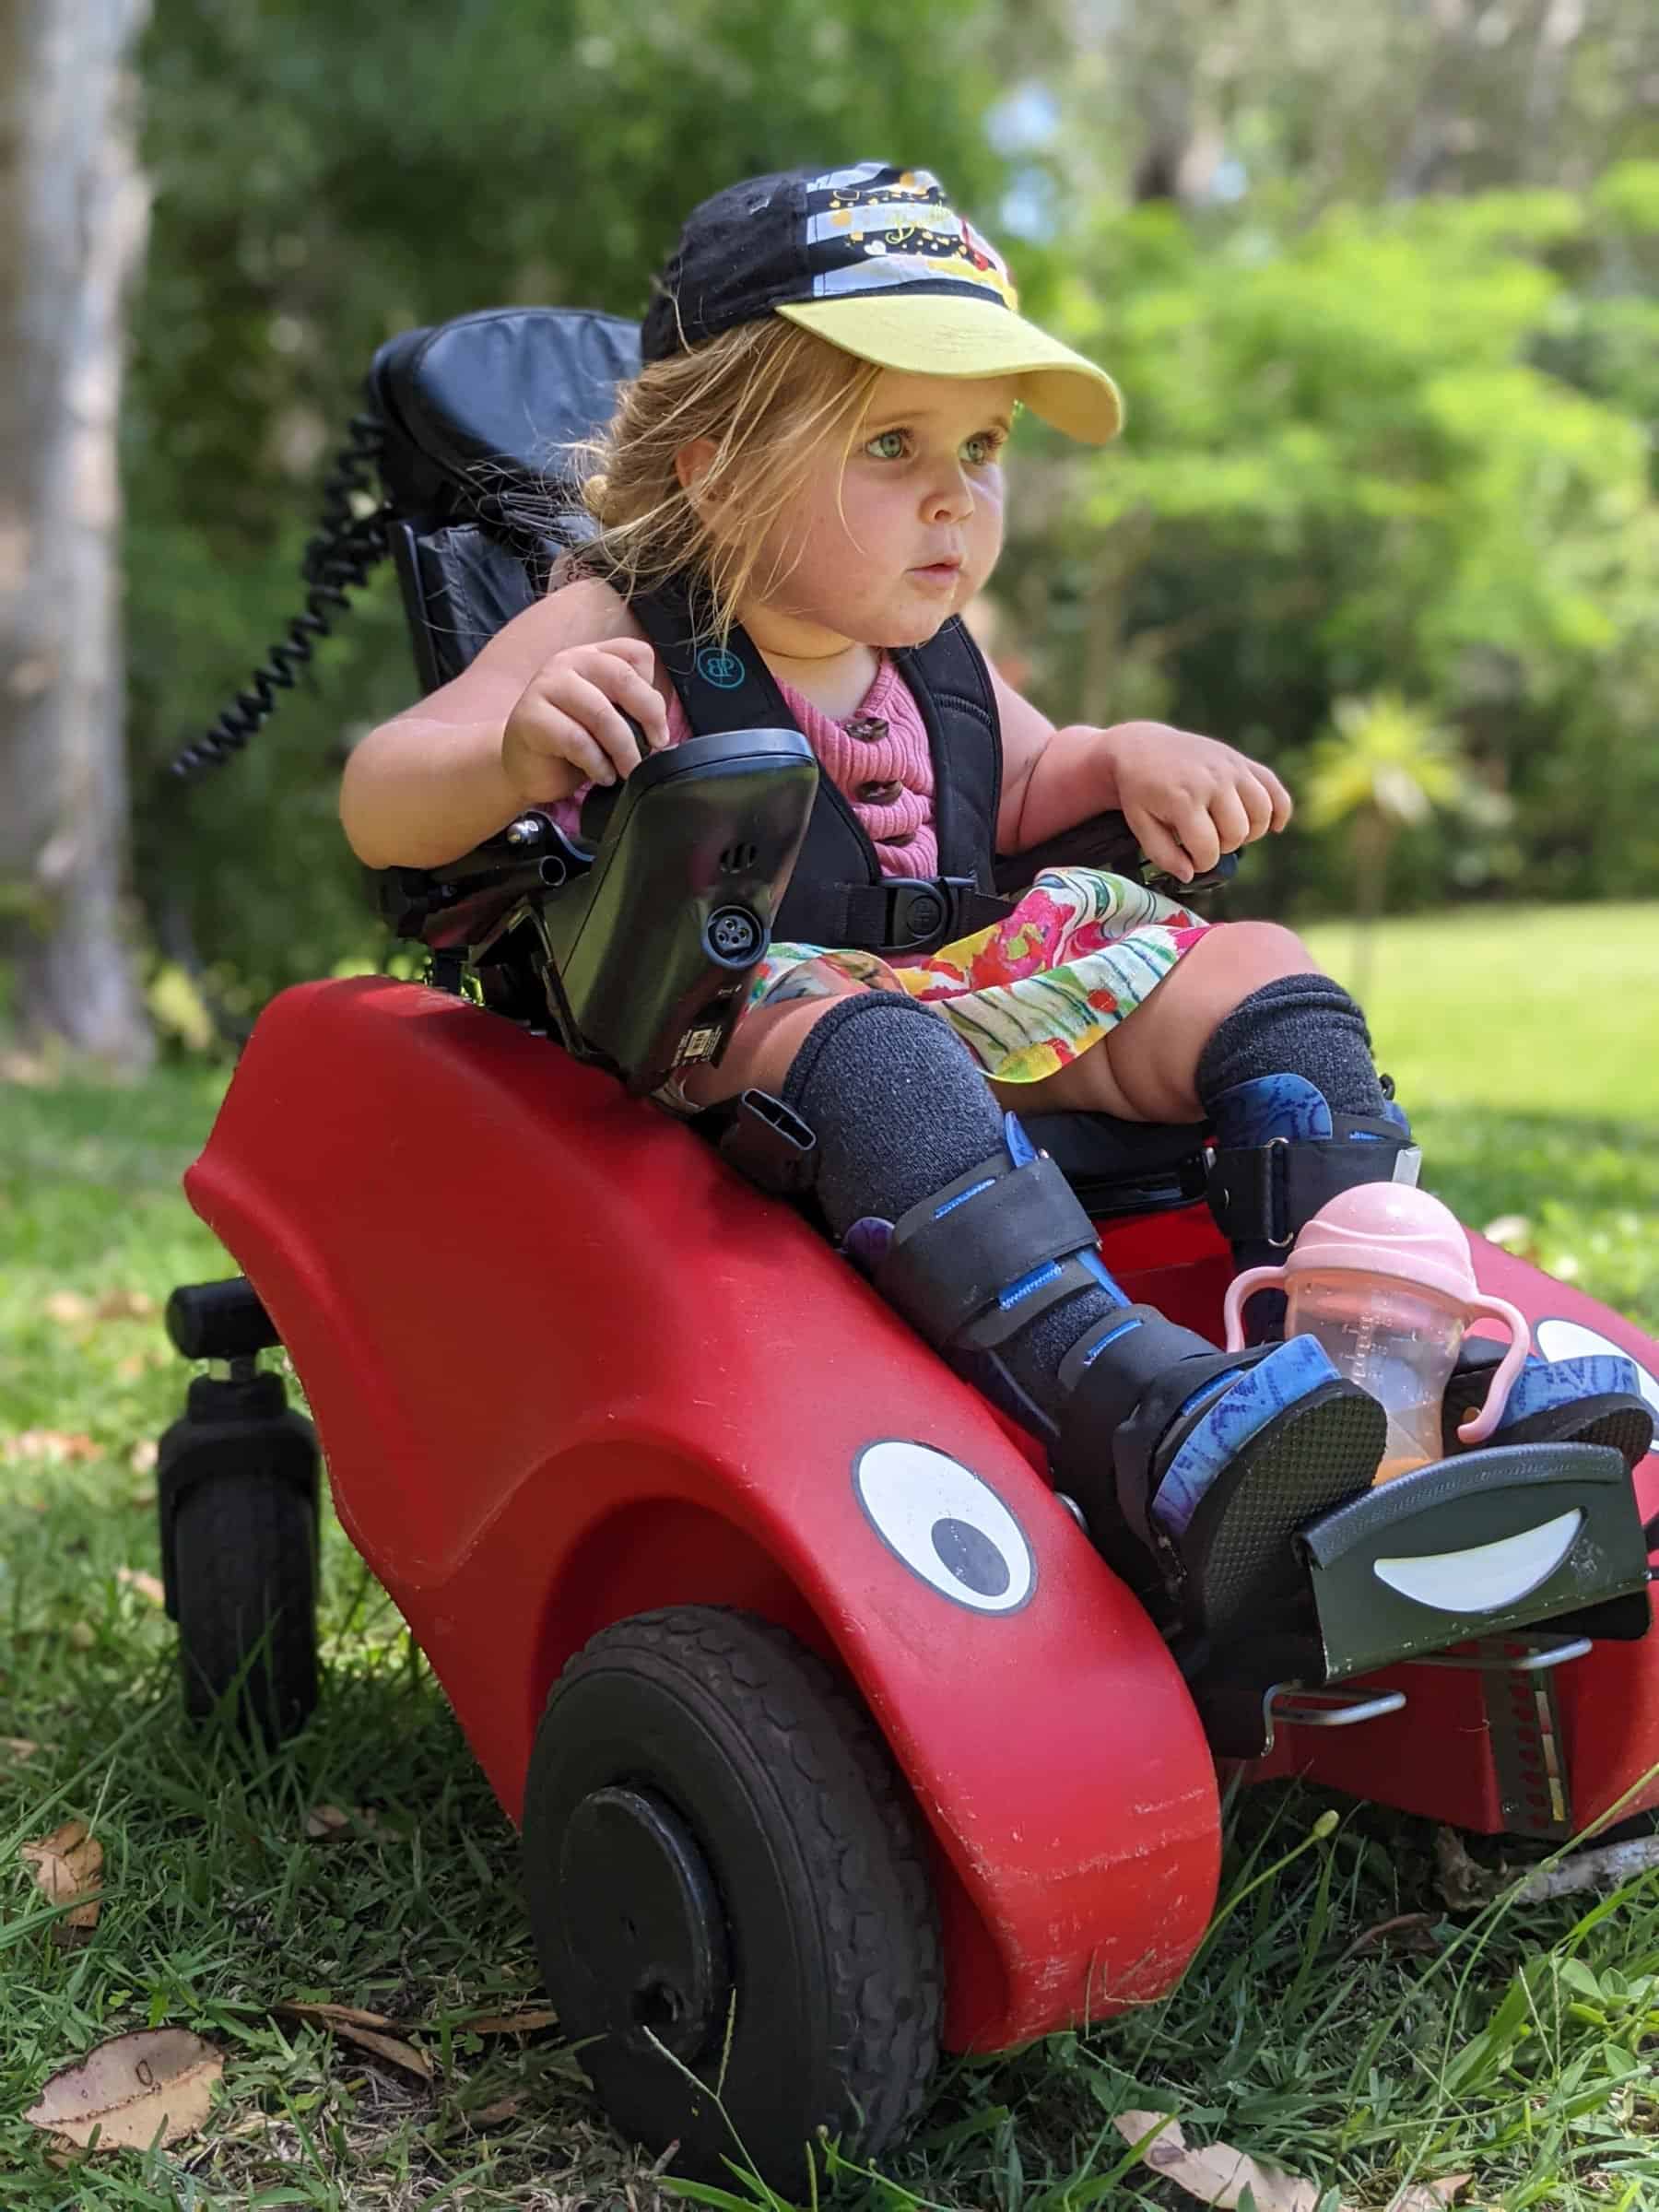 A little girl driving her Wizzybug which looks like a little red car and is powered mobility for children who cannot walk.